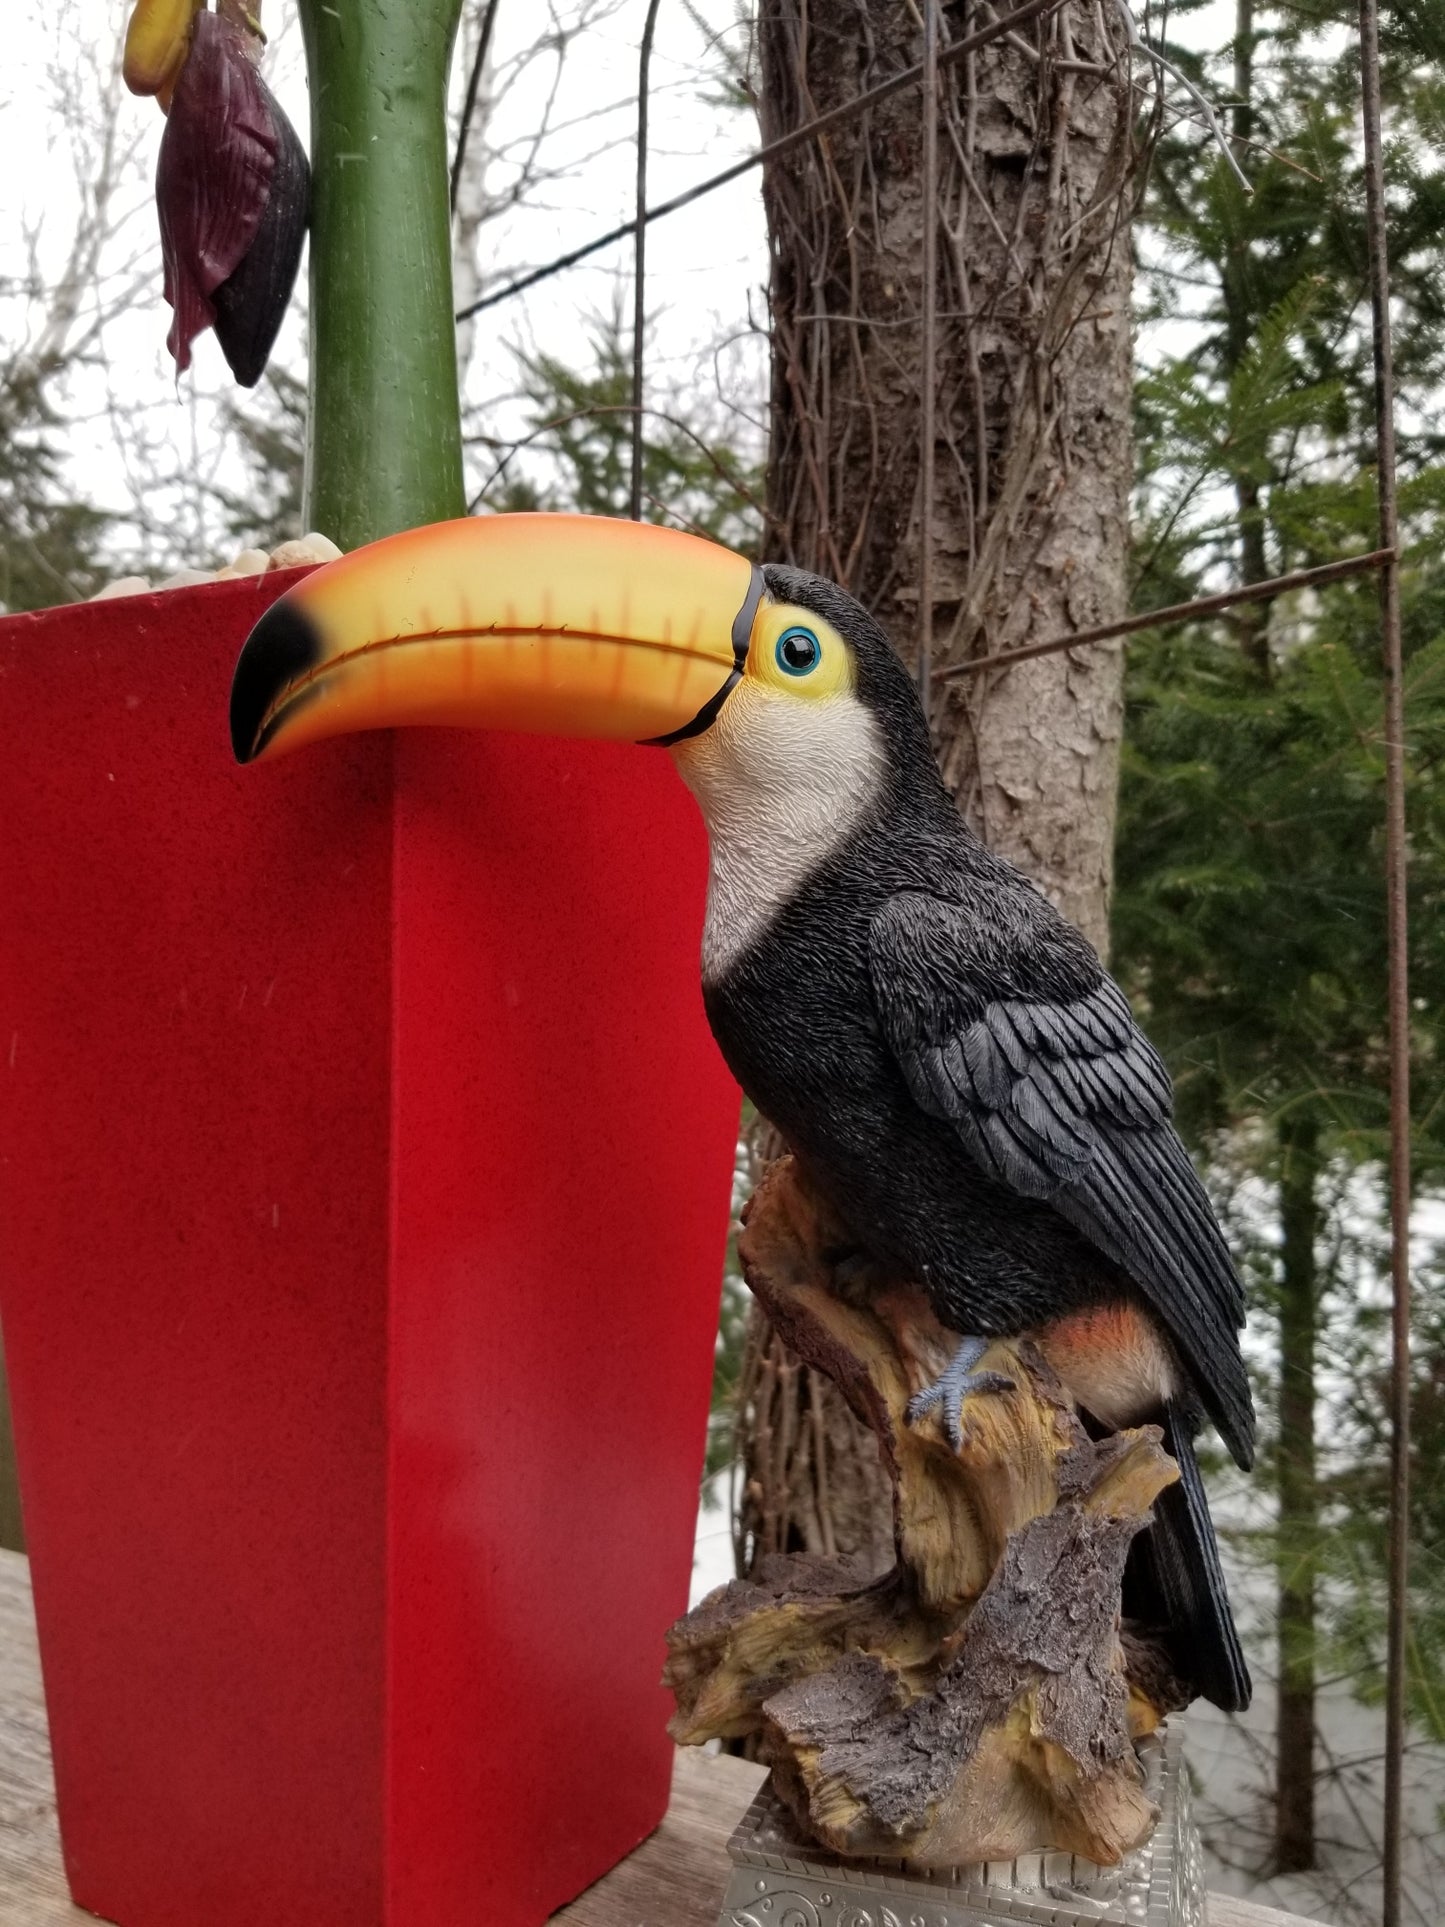 buy a toucan bird statue at auction